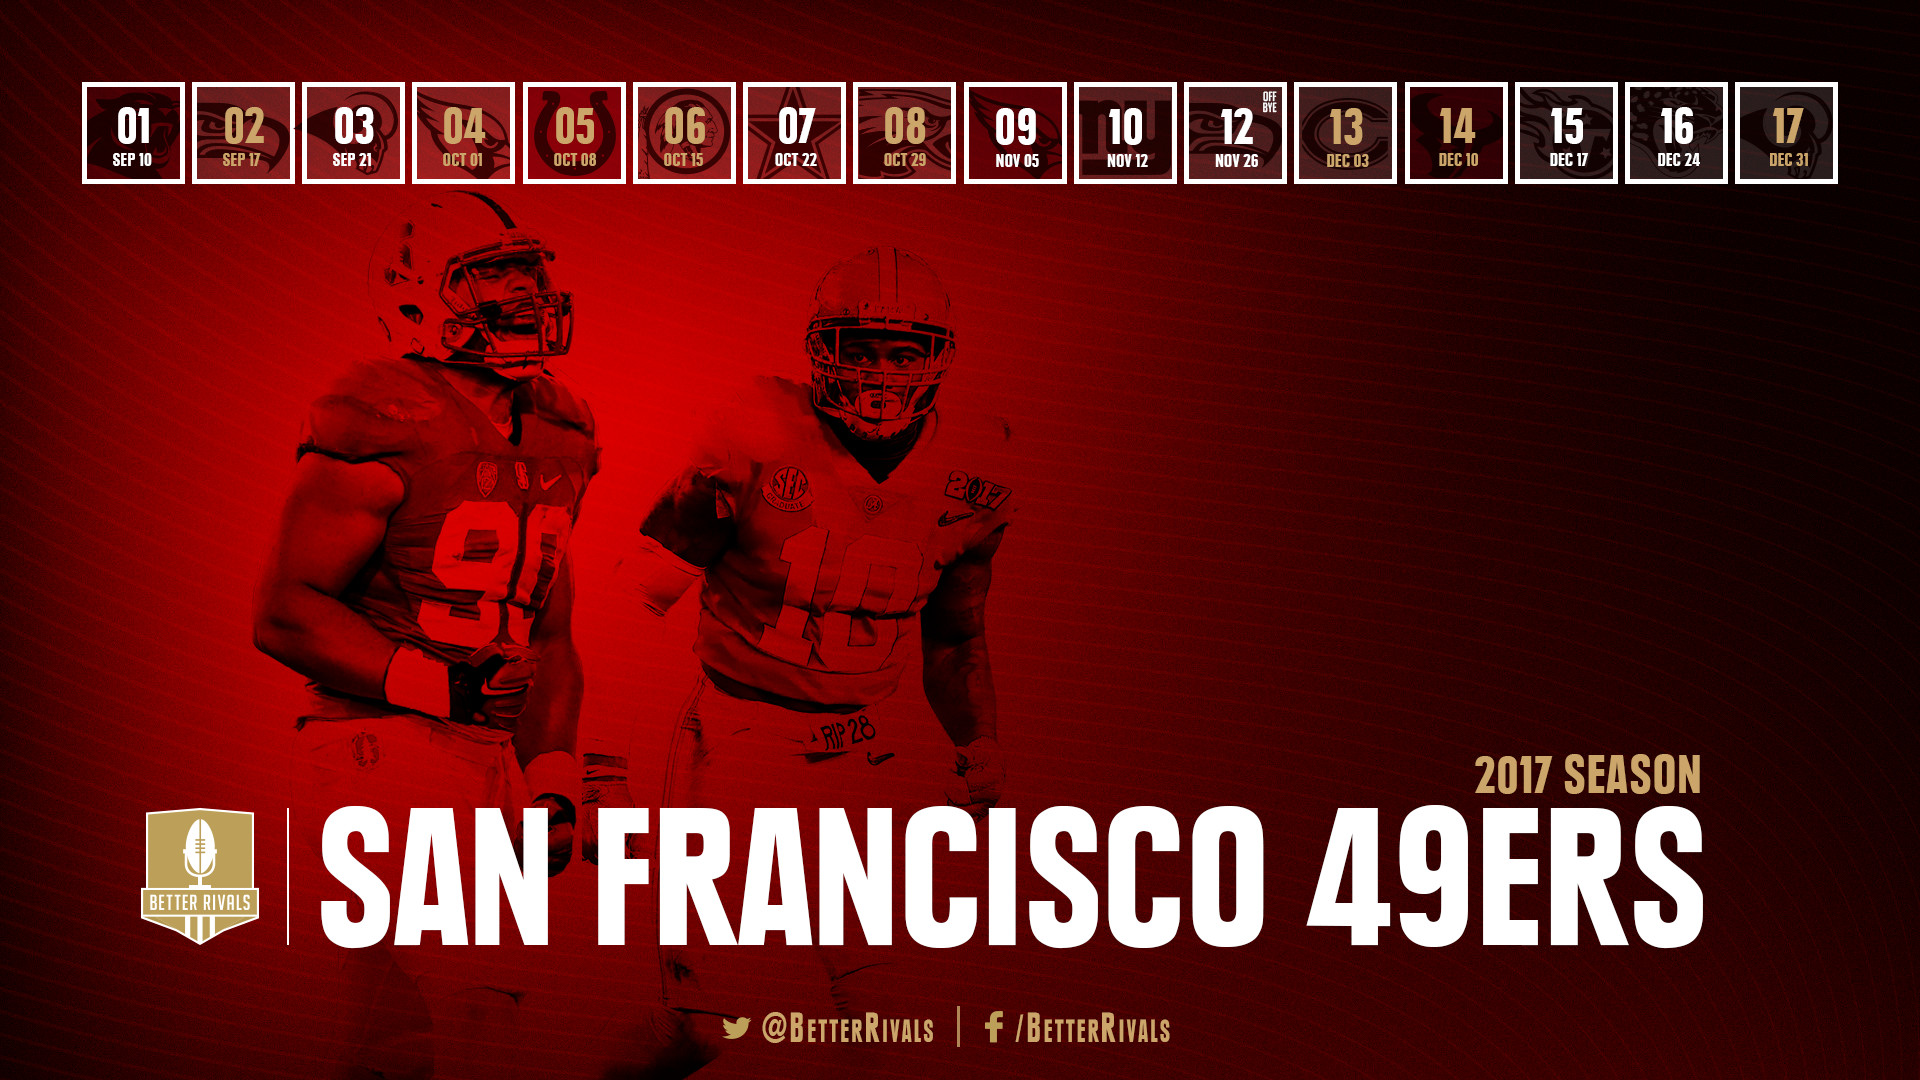 1920x1080 Get ready for the season by downloading the new 49ers schedule wallpapers  for your desktop or mobile.